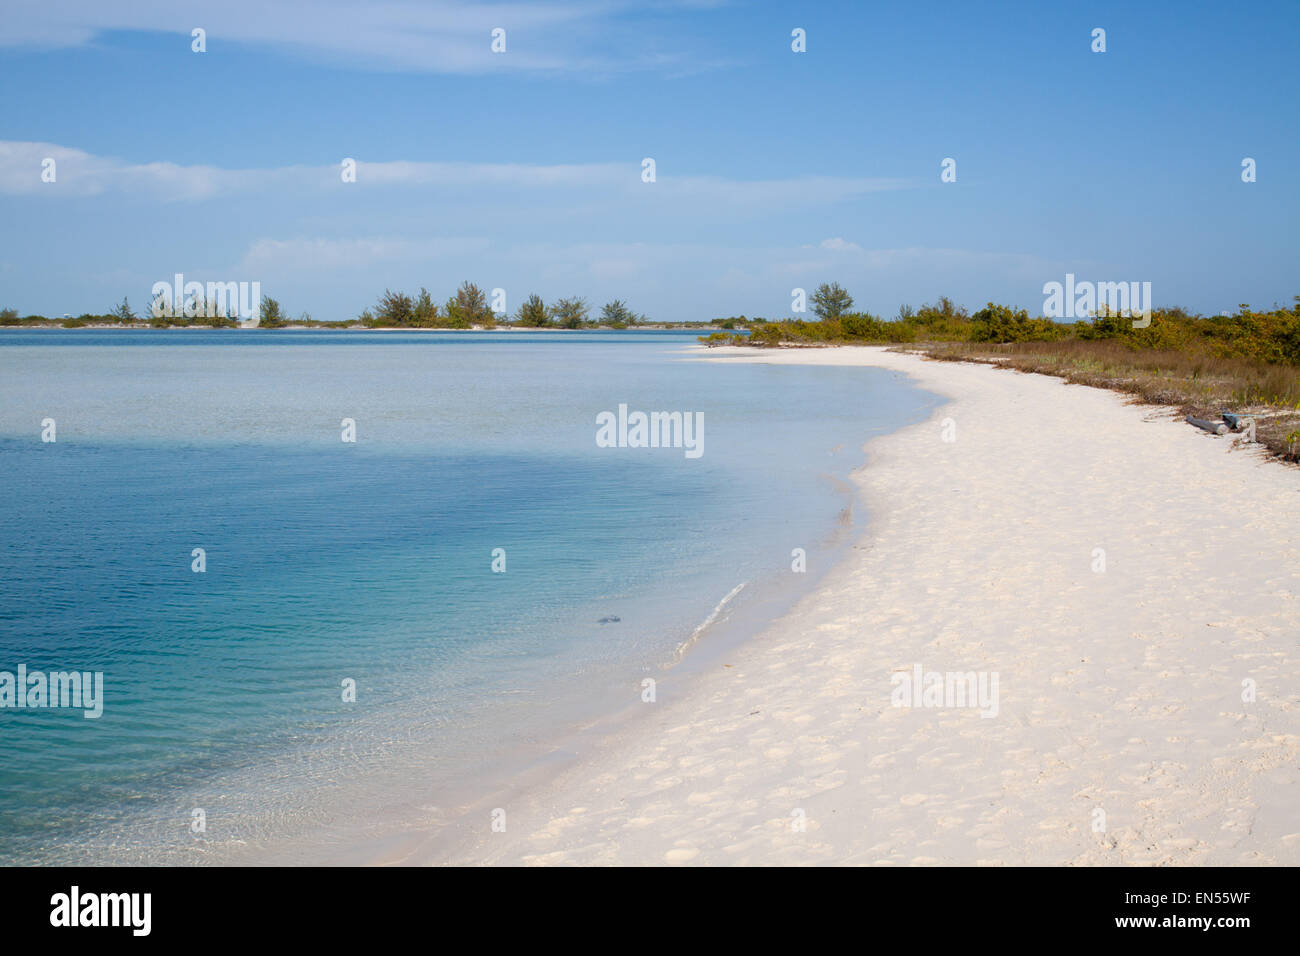 Tropical beach with white sand in front of the sea Stock Photo